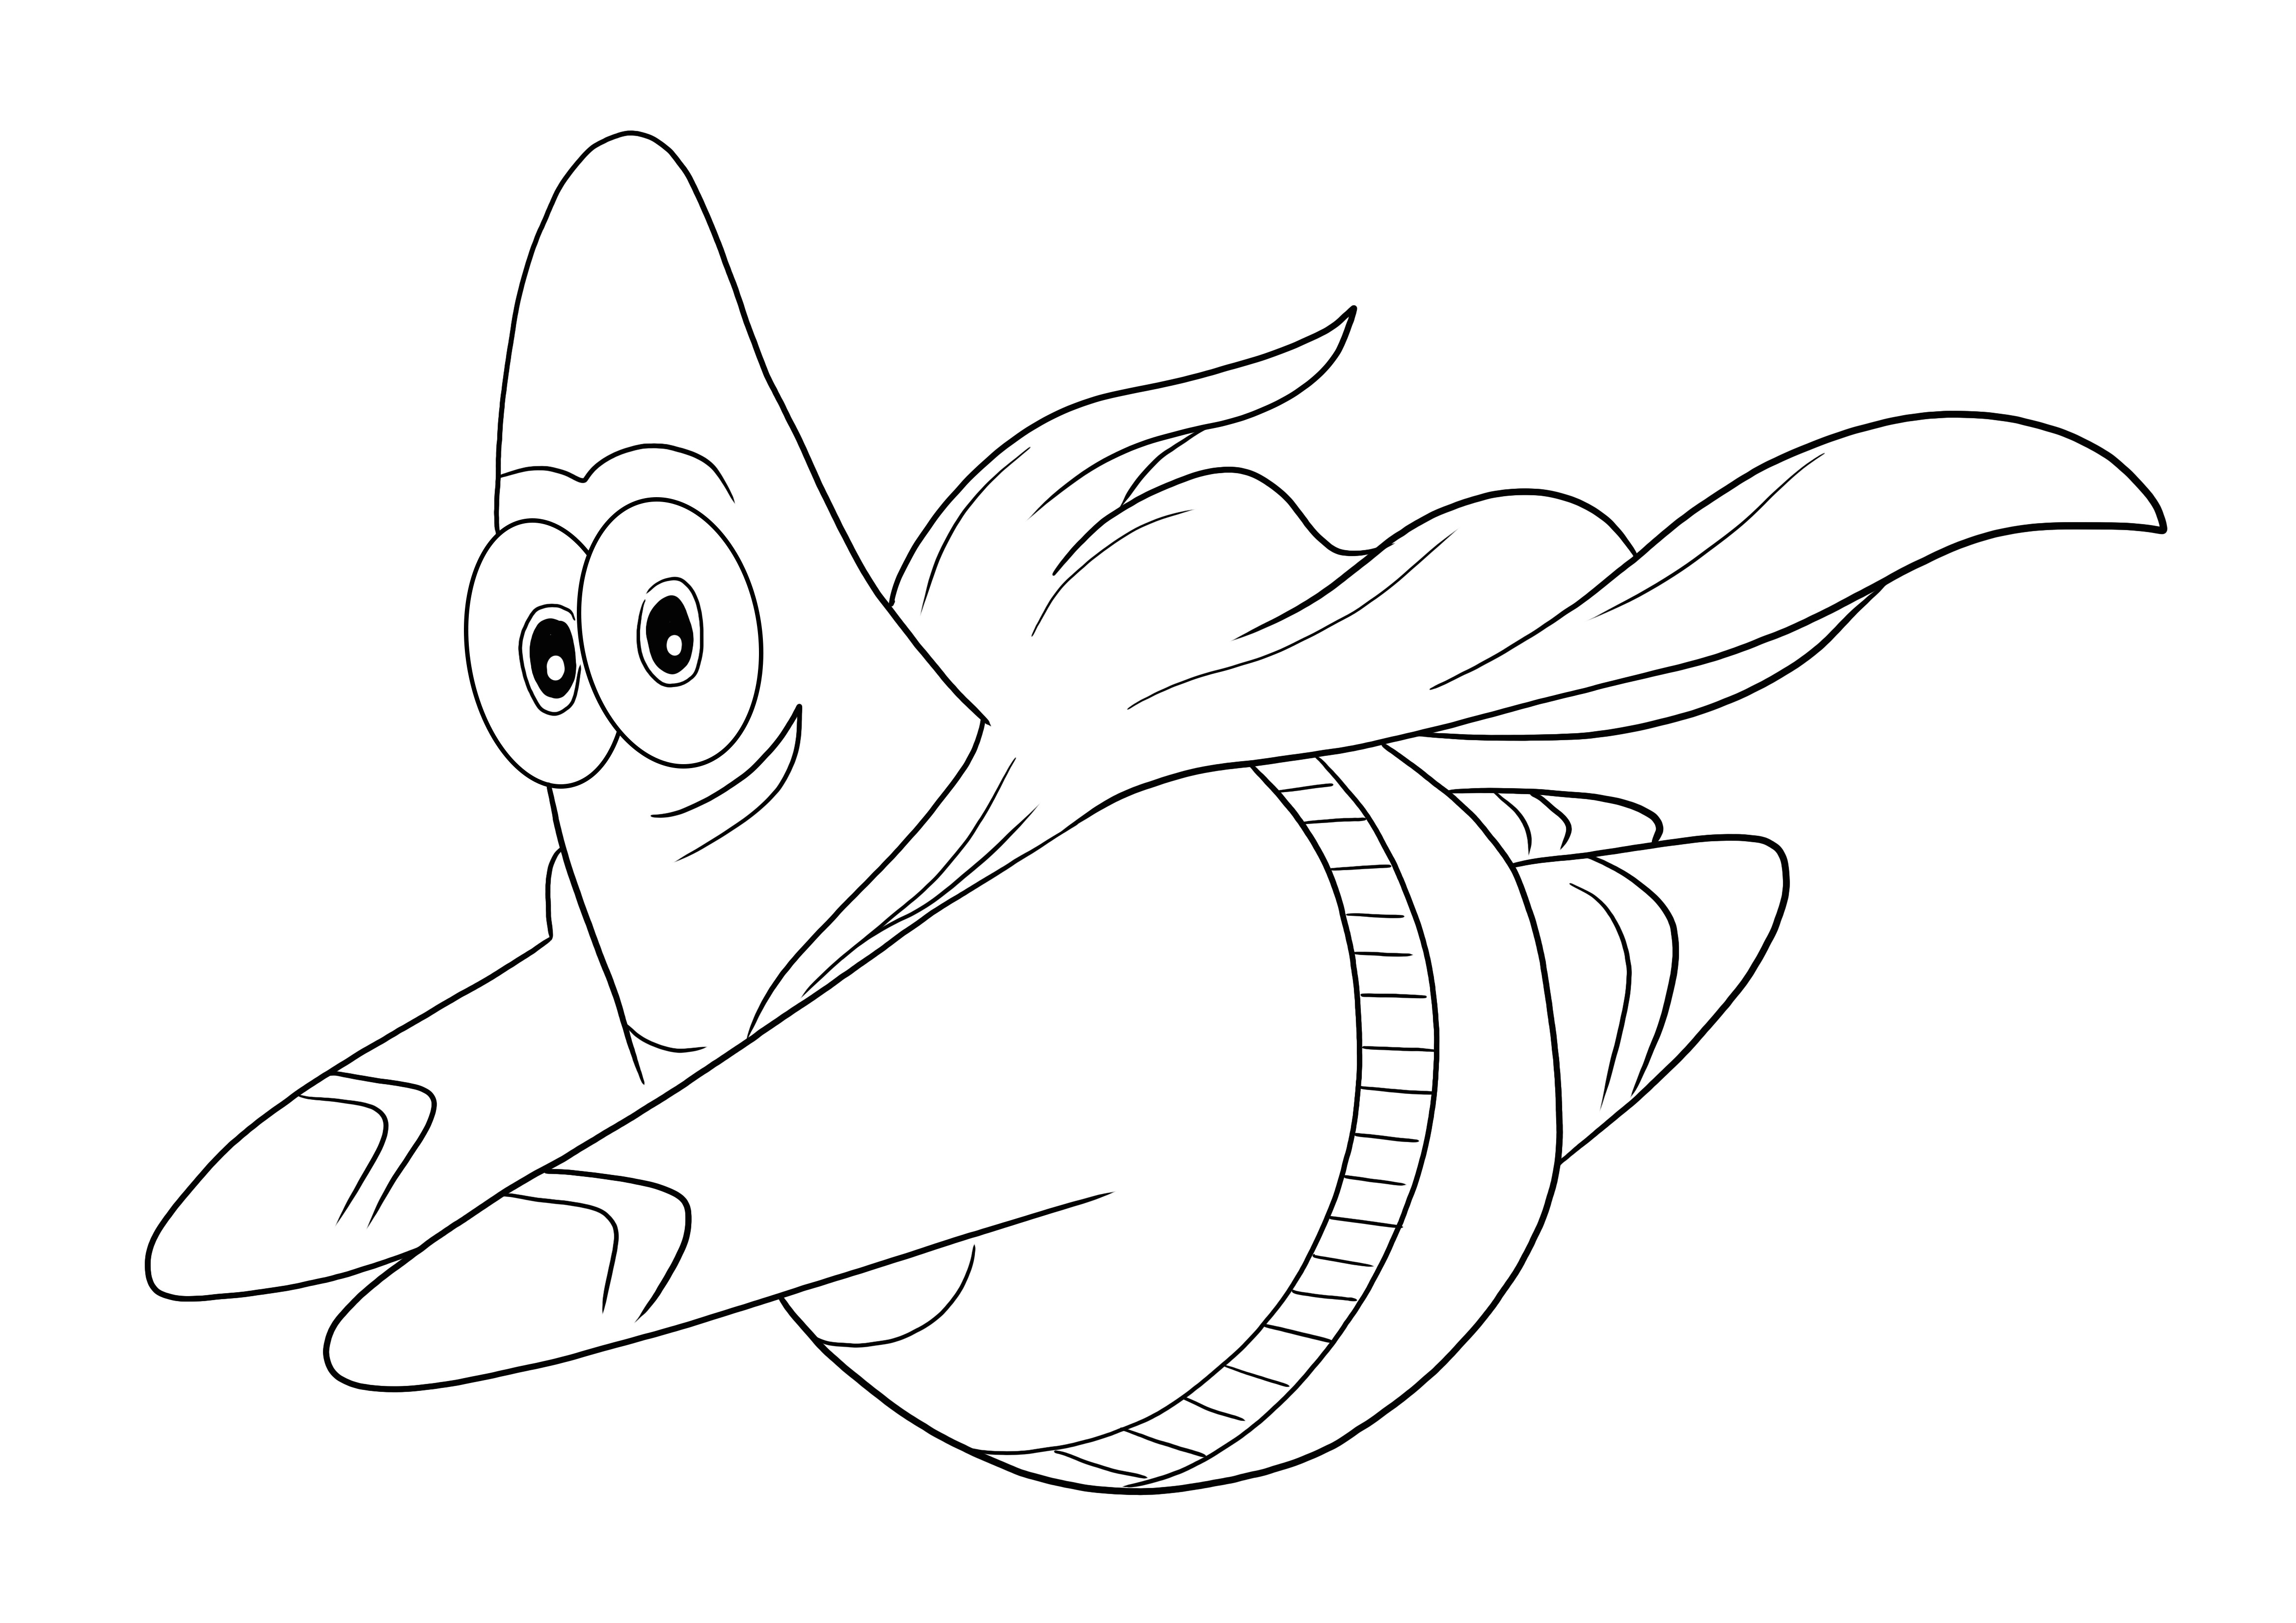 Patrick the Superman coloring picture for free downloading or printing